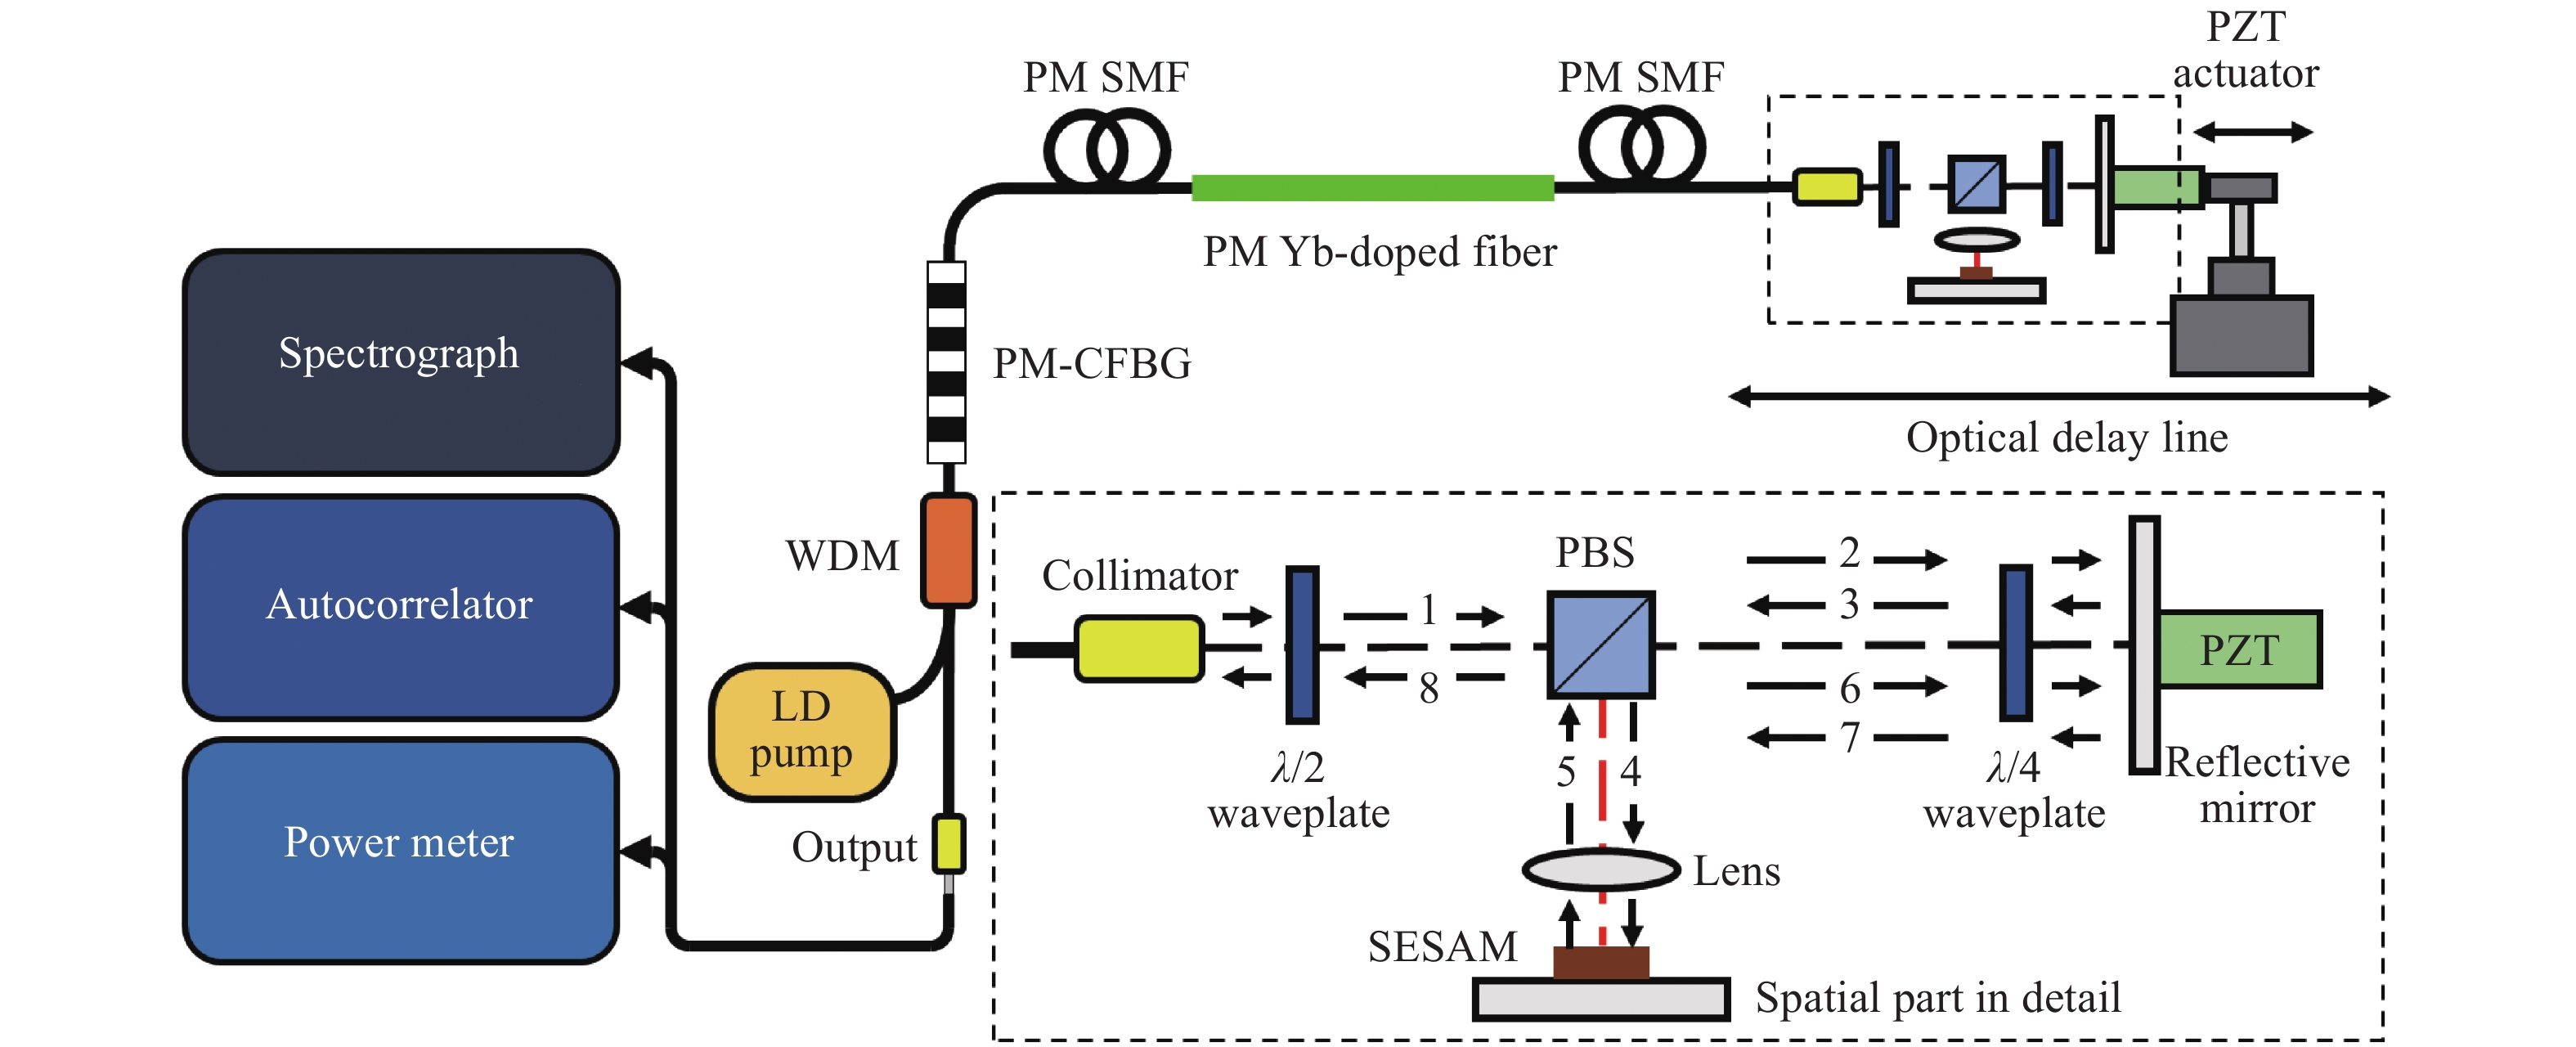 Schematic of mode-locked Yb-fiber laser and the details of spatial optical path. PZT, piezoelectric ceramic transducer; PBS, polarization beam splitter; SESAM, semiconductor saturable absorption mirror; PM-CFBG, polarization-maintained chirped fiber Bragg grating; PM SMF, polarization-maintained single mode fiber; WDM, wavelength division multiplexer